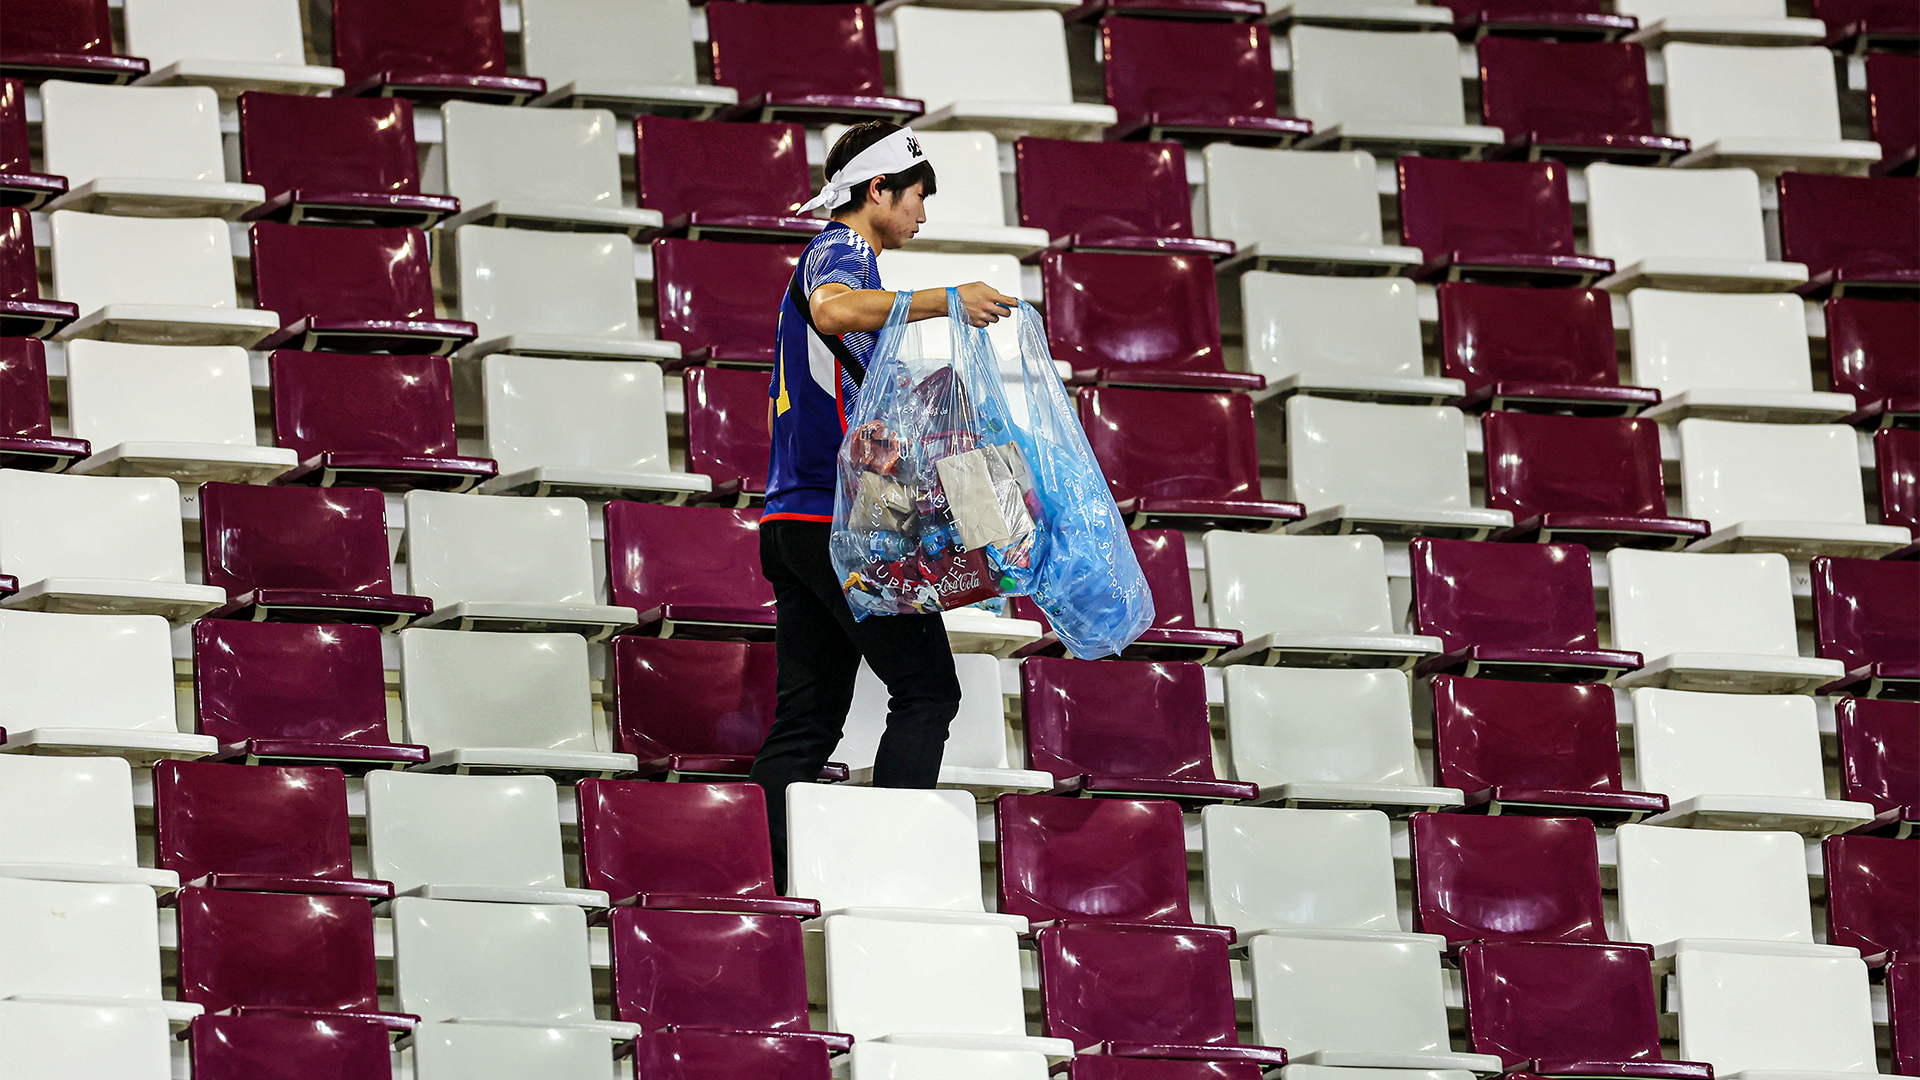 Wonderful Japan fans help Qatar workers pick up stadium trash after thrilling World Cup win vs Germany - Goal.com